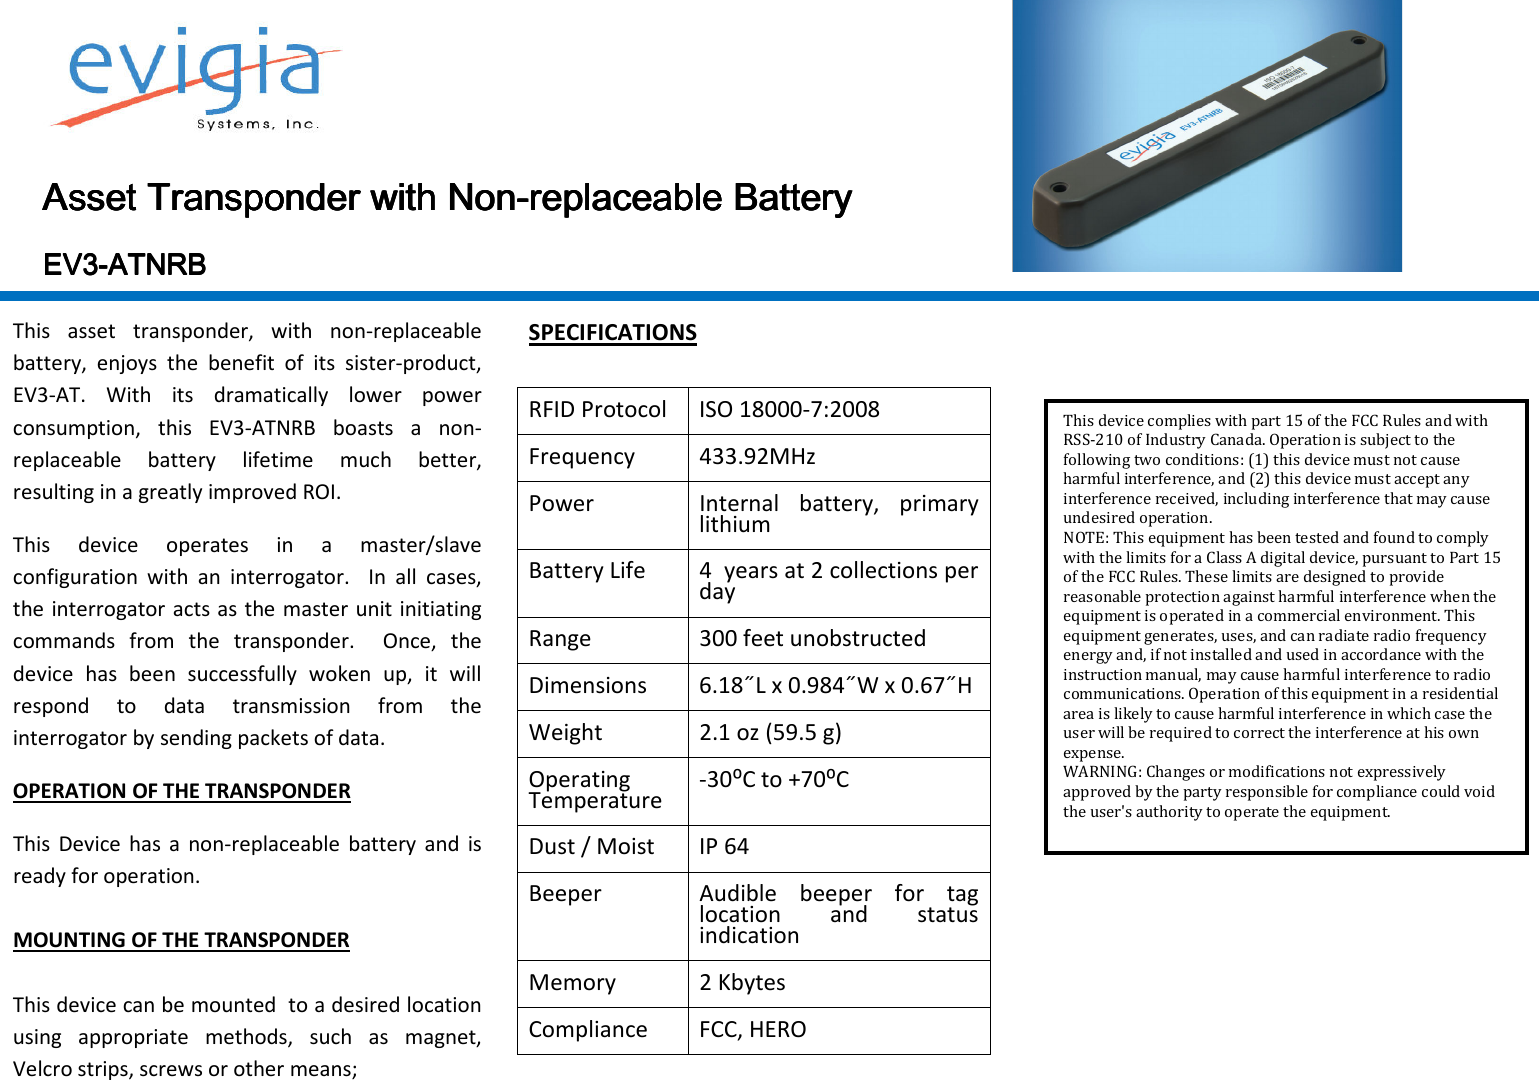  AssetAssetAssetAsset    TransponderTransponderTransponderTransponder    with Nonwith Nonwith Nonwith Non----replaceable Batteryreplaceable Batteryreplaceable Batteryreplaceable Battery                                EV3EV3EV3EV3----AAAATTTTNRBNRBNRBNRB    This  asset  transponder,  with  non-replaceable battery,  enjoys  the  benefit  of  its  sister-product, EV3-AT.  With  its  dramatically  lower  power consumption,  this  EV3-ATNRB  boasts  a  non-replaceable  battery  lifetime  much  better, resulting in a greatly improved ROI. This  device  operates  in  a  master/slave configuration  with  an  interrogator.    In  all  cases, the interrogator acts as the master unit initiating commands  from  the  transponder.    Once,  the device  has  been  successfully  woken  up,  it  will respond  to  data  transmission  from  the interrogator by sending packets of data. OPERATION OF THE TRANSPONDER This  Device  has  a  non-replaceable  battery  and  is ready for operation.   MOUNTING OF THE TRANSPONDER  This device can be mounted  to a desired location using  appropriate  methods,  such  as  magnet, Velcro strips, screws or other means;  SPECIFICATIONS  RFID Protocol  ISO 18000-7:2008 Frequency  433.92MHz Power  Internal  battery,  primary lithium Battery Life  4  years at 2 collections per day Range  300 feet unobstructed Dimensions  6.18˝L x 0.984˝W x 0.67˝H  Weight  2.1 oz (59.5 g) Operating Temperature  -30⁰C to +70⁰C Dust / Moist  IP 64 Beeper  Audible  beeper  for  tag location  and  status indication Memory  2 Kbytes Compliance  FCC, HERO      This device complies with part 15 of the FCC Rules and with RSS-210 of Industry Canada. Operation is subject to the following two conditions: (1) this device must not cause harmful interference, and (2) this device must accept any interference received, including interference that may cause undesired operation. NOTE: This equipment has been tested and found to comply with the limits for a Class A digital device, pursuant to Part 15 of the FCC Rules. These limits are designed to provide reasonable protection against harmful interference when the equipment is operated in a commercial environment. This equipment generates, uses, and can radiate radio frequency energy and, if not installed and used in accordance with the instruction manual, may cause harmful interference to radio communications. Operation of this equipment in a residential area is likely to cause harmful interference in which case the user will be required to correct the interference at his own expense. WARNING: Changes or modifications not expressively approved by the party responsible for compliance could void the user&apos;s authority to operate the equipment. 